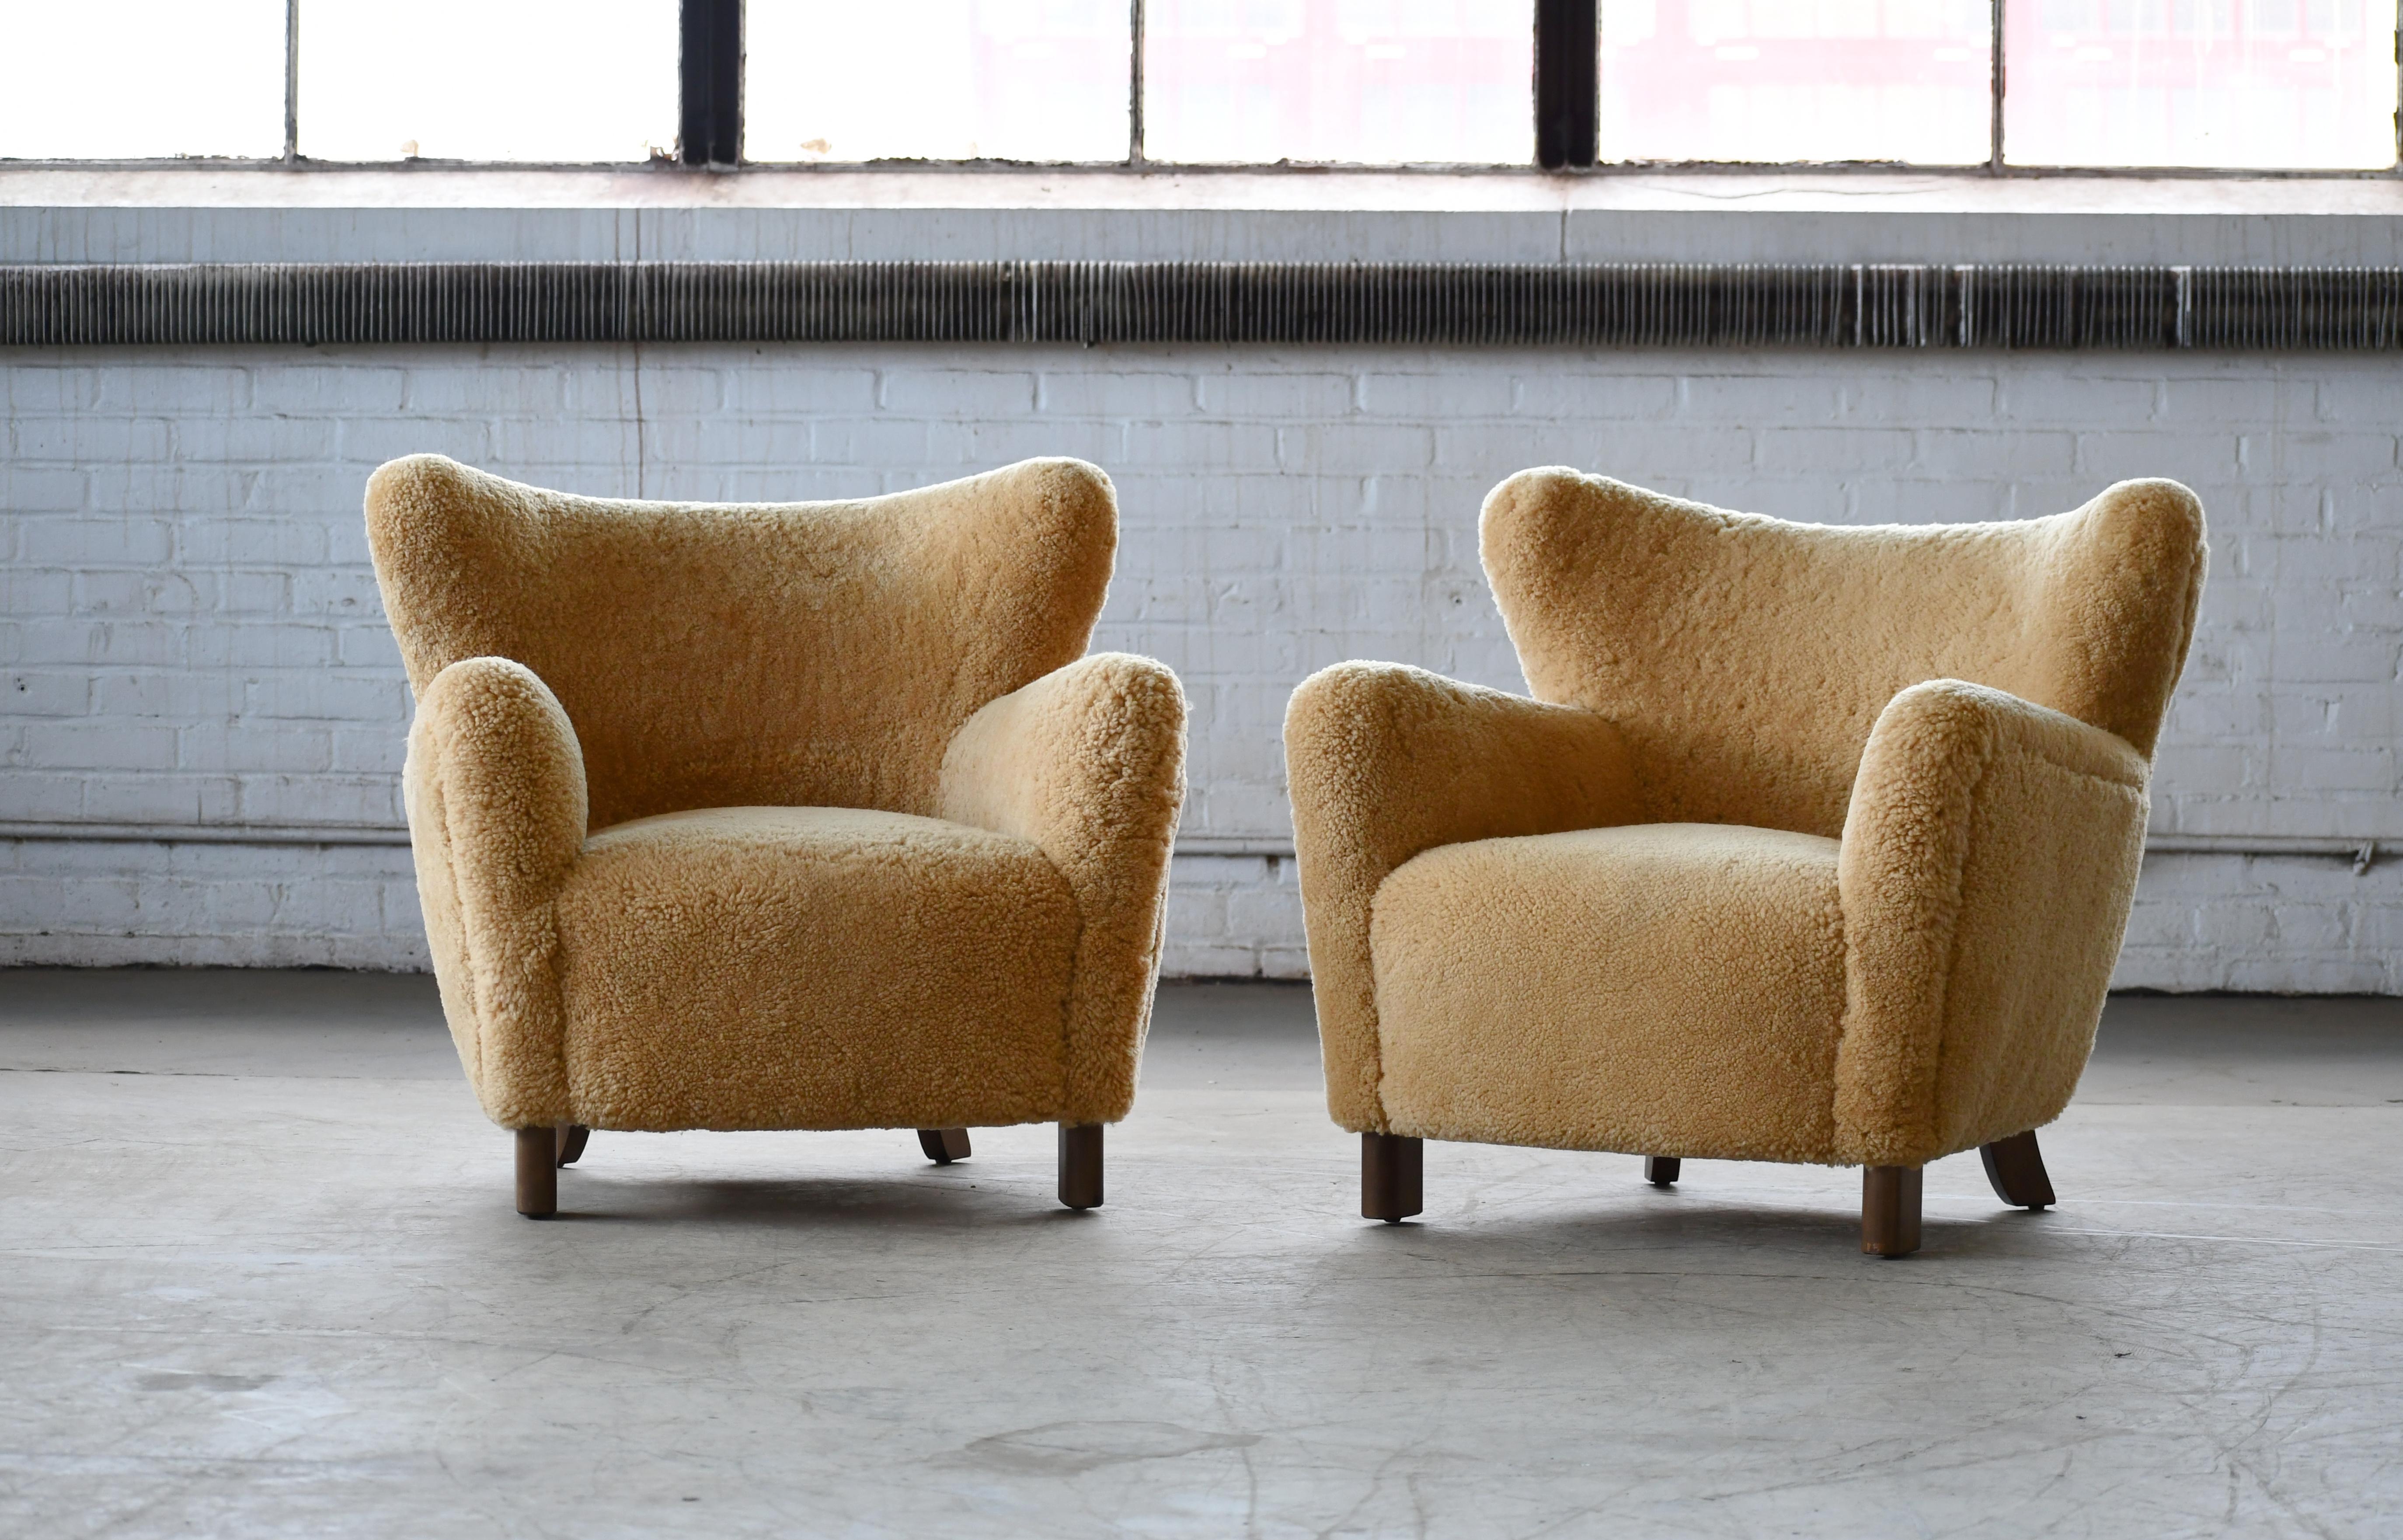 Beautiful exuberant pair of new Danish modern lounge chairs of our own design. The design is inspired by the classic designs from the 1940s but with our own design variations and up-dated dimensions. The chairs are based on a hand-built frame built